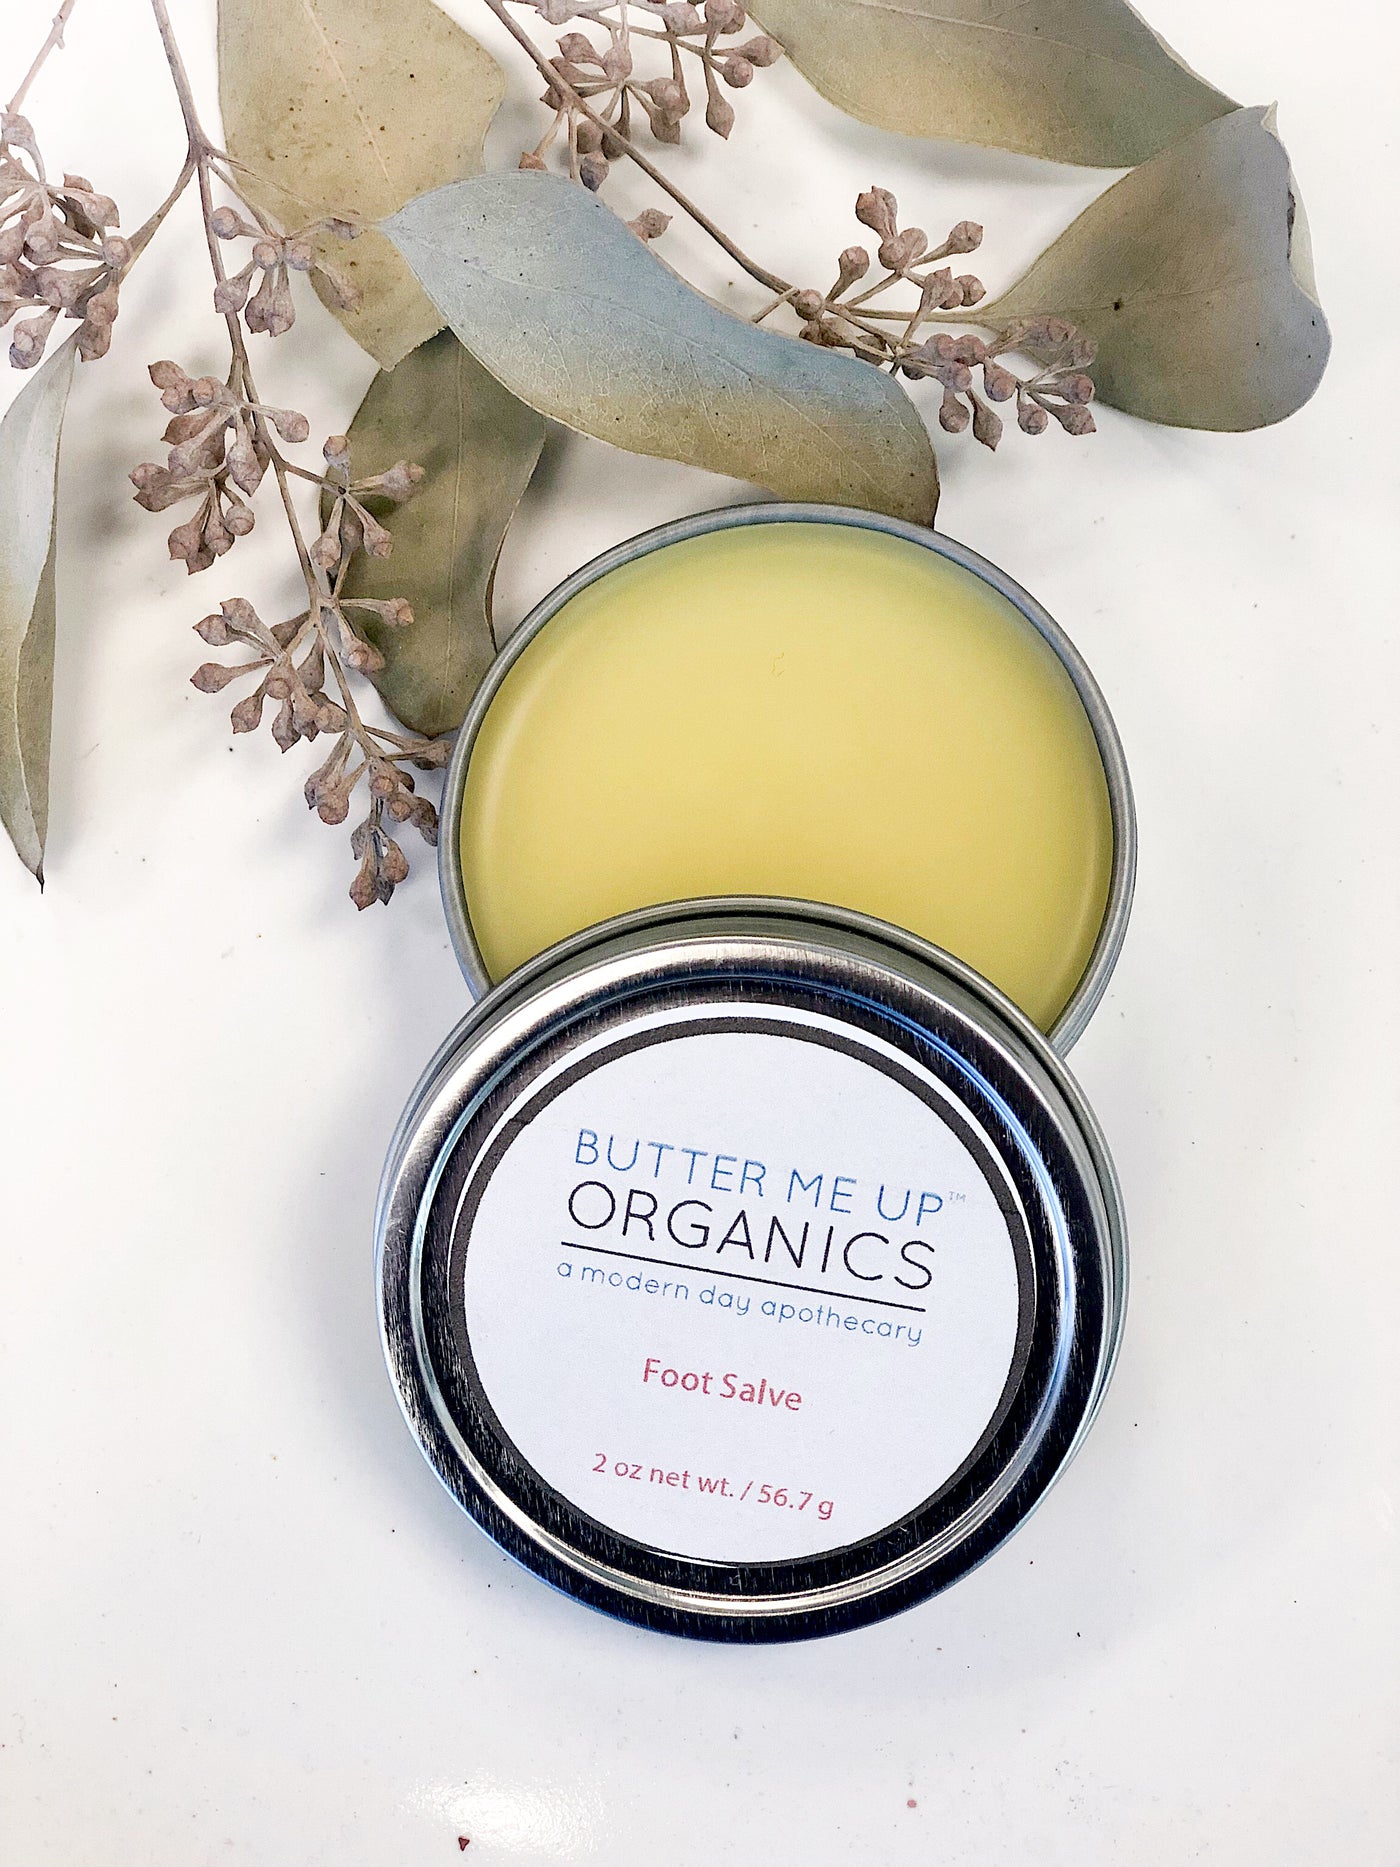 Organic Vegan Cruelty-Free Foot Salve - Roses & Chains | Fashionable Clothing, Shoes, Accessories, & More